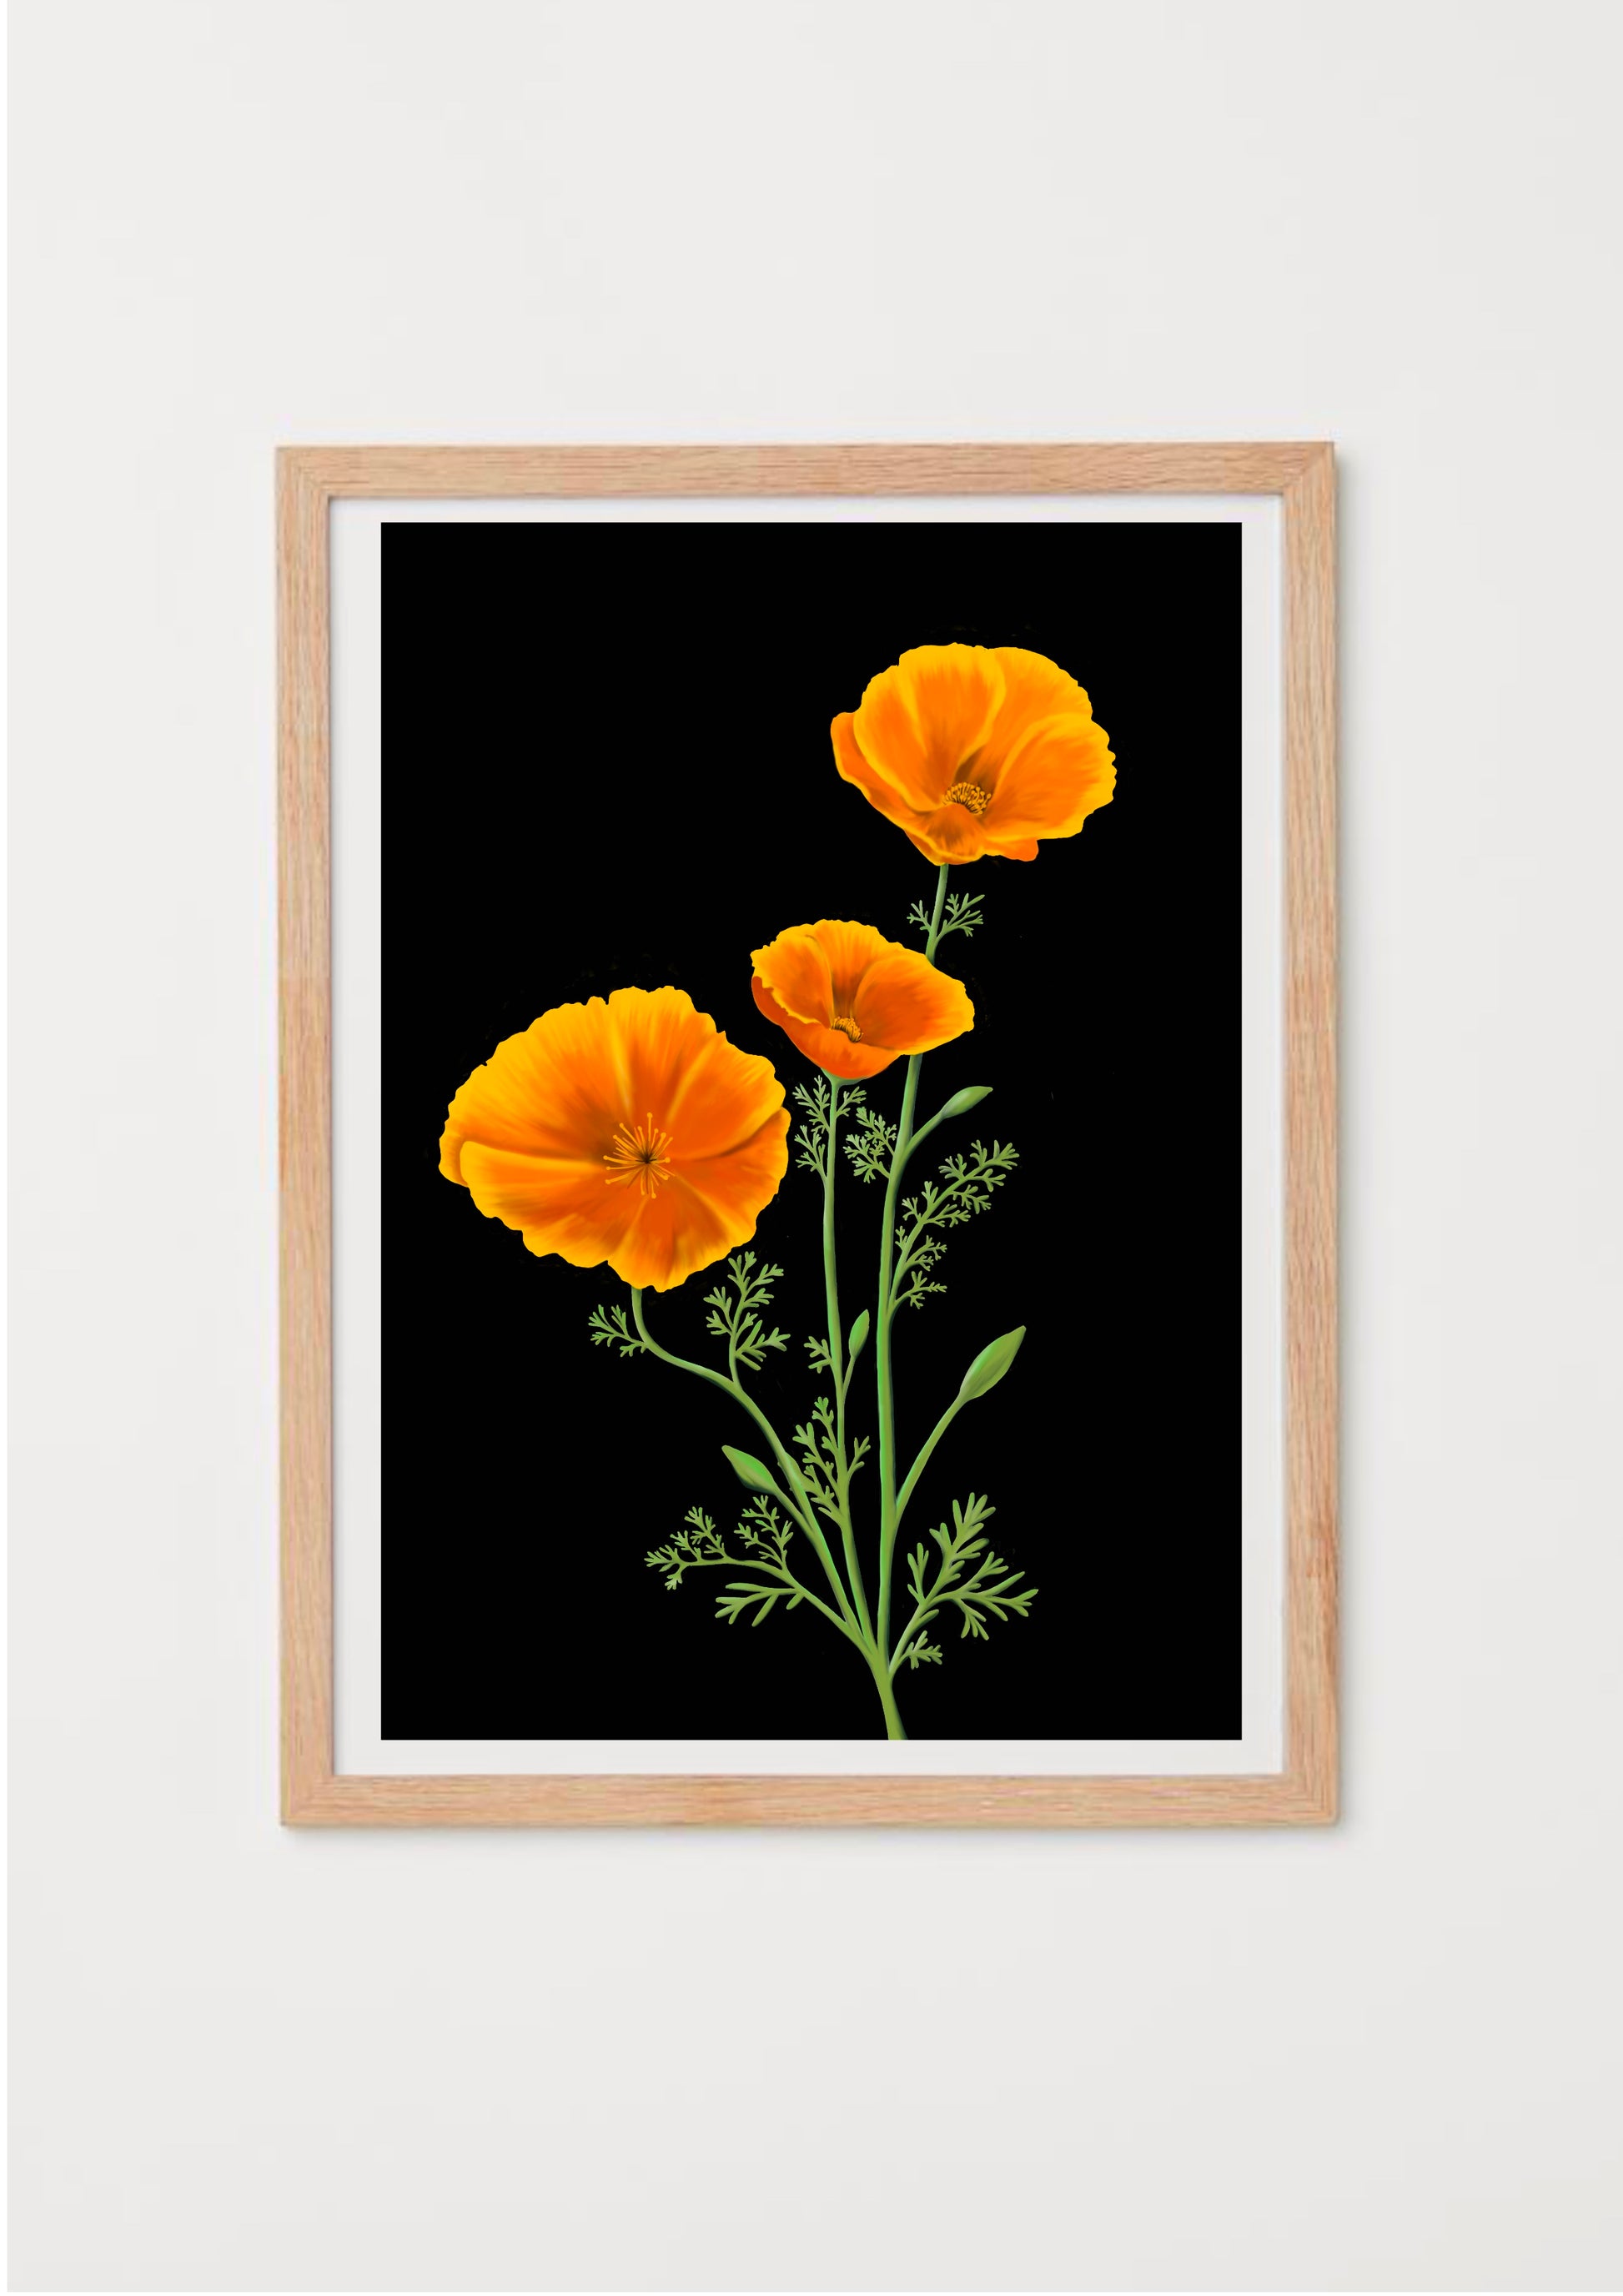  An illustrated art print of 3 orange california poppies on a black background in a wooden frame